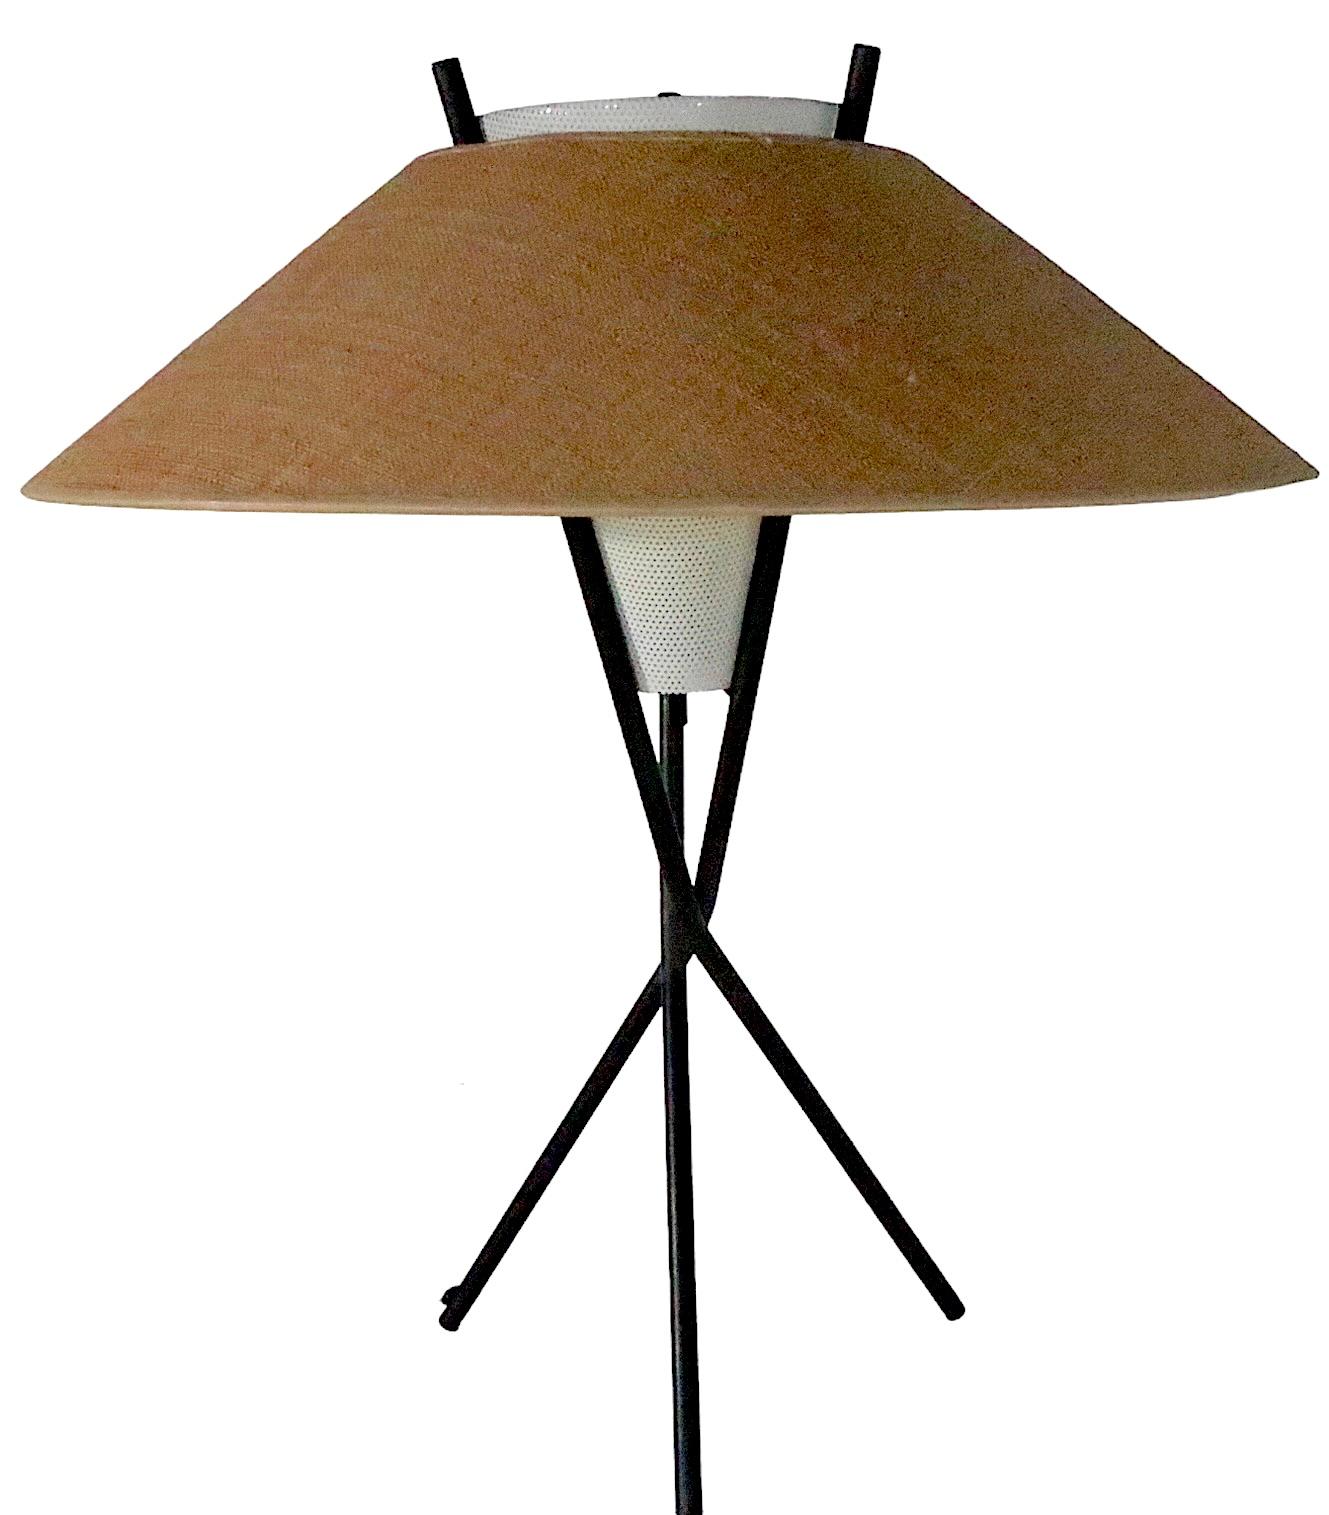 Midcentury Tri Pod Table Lamp by Gerald Thurston for Lightolier C 1950s For Sale 1